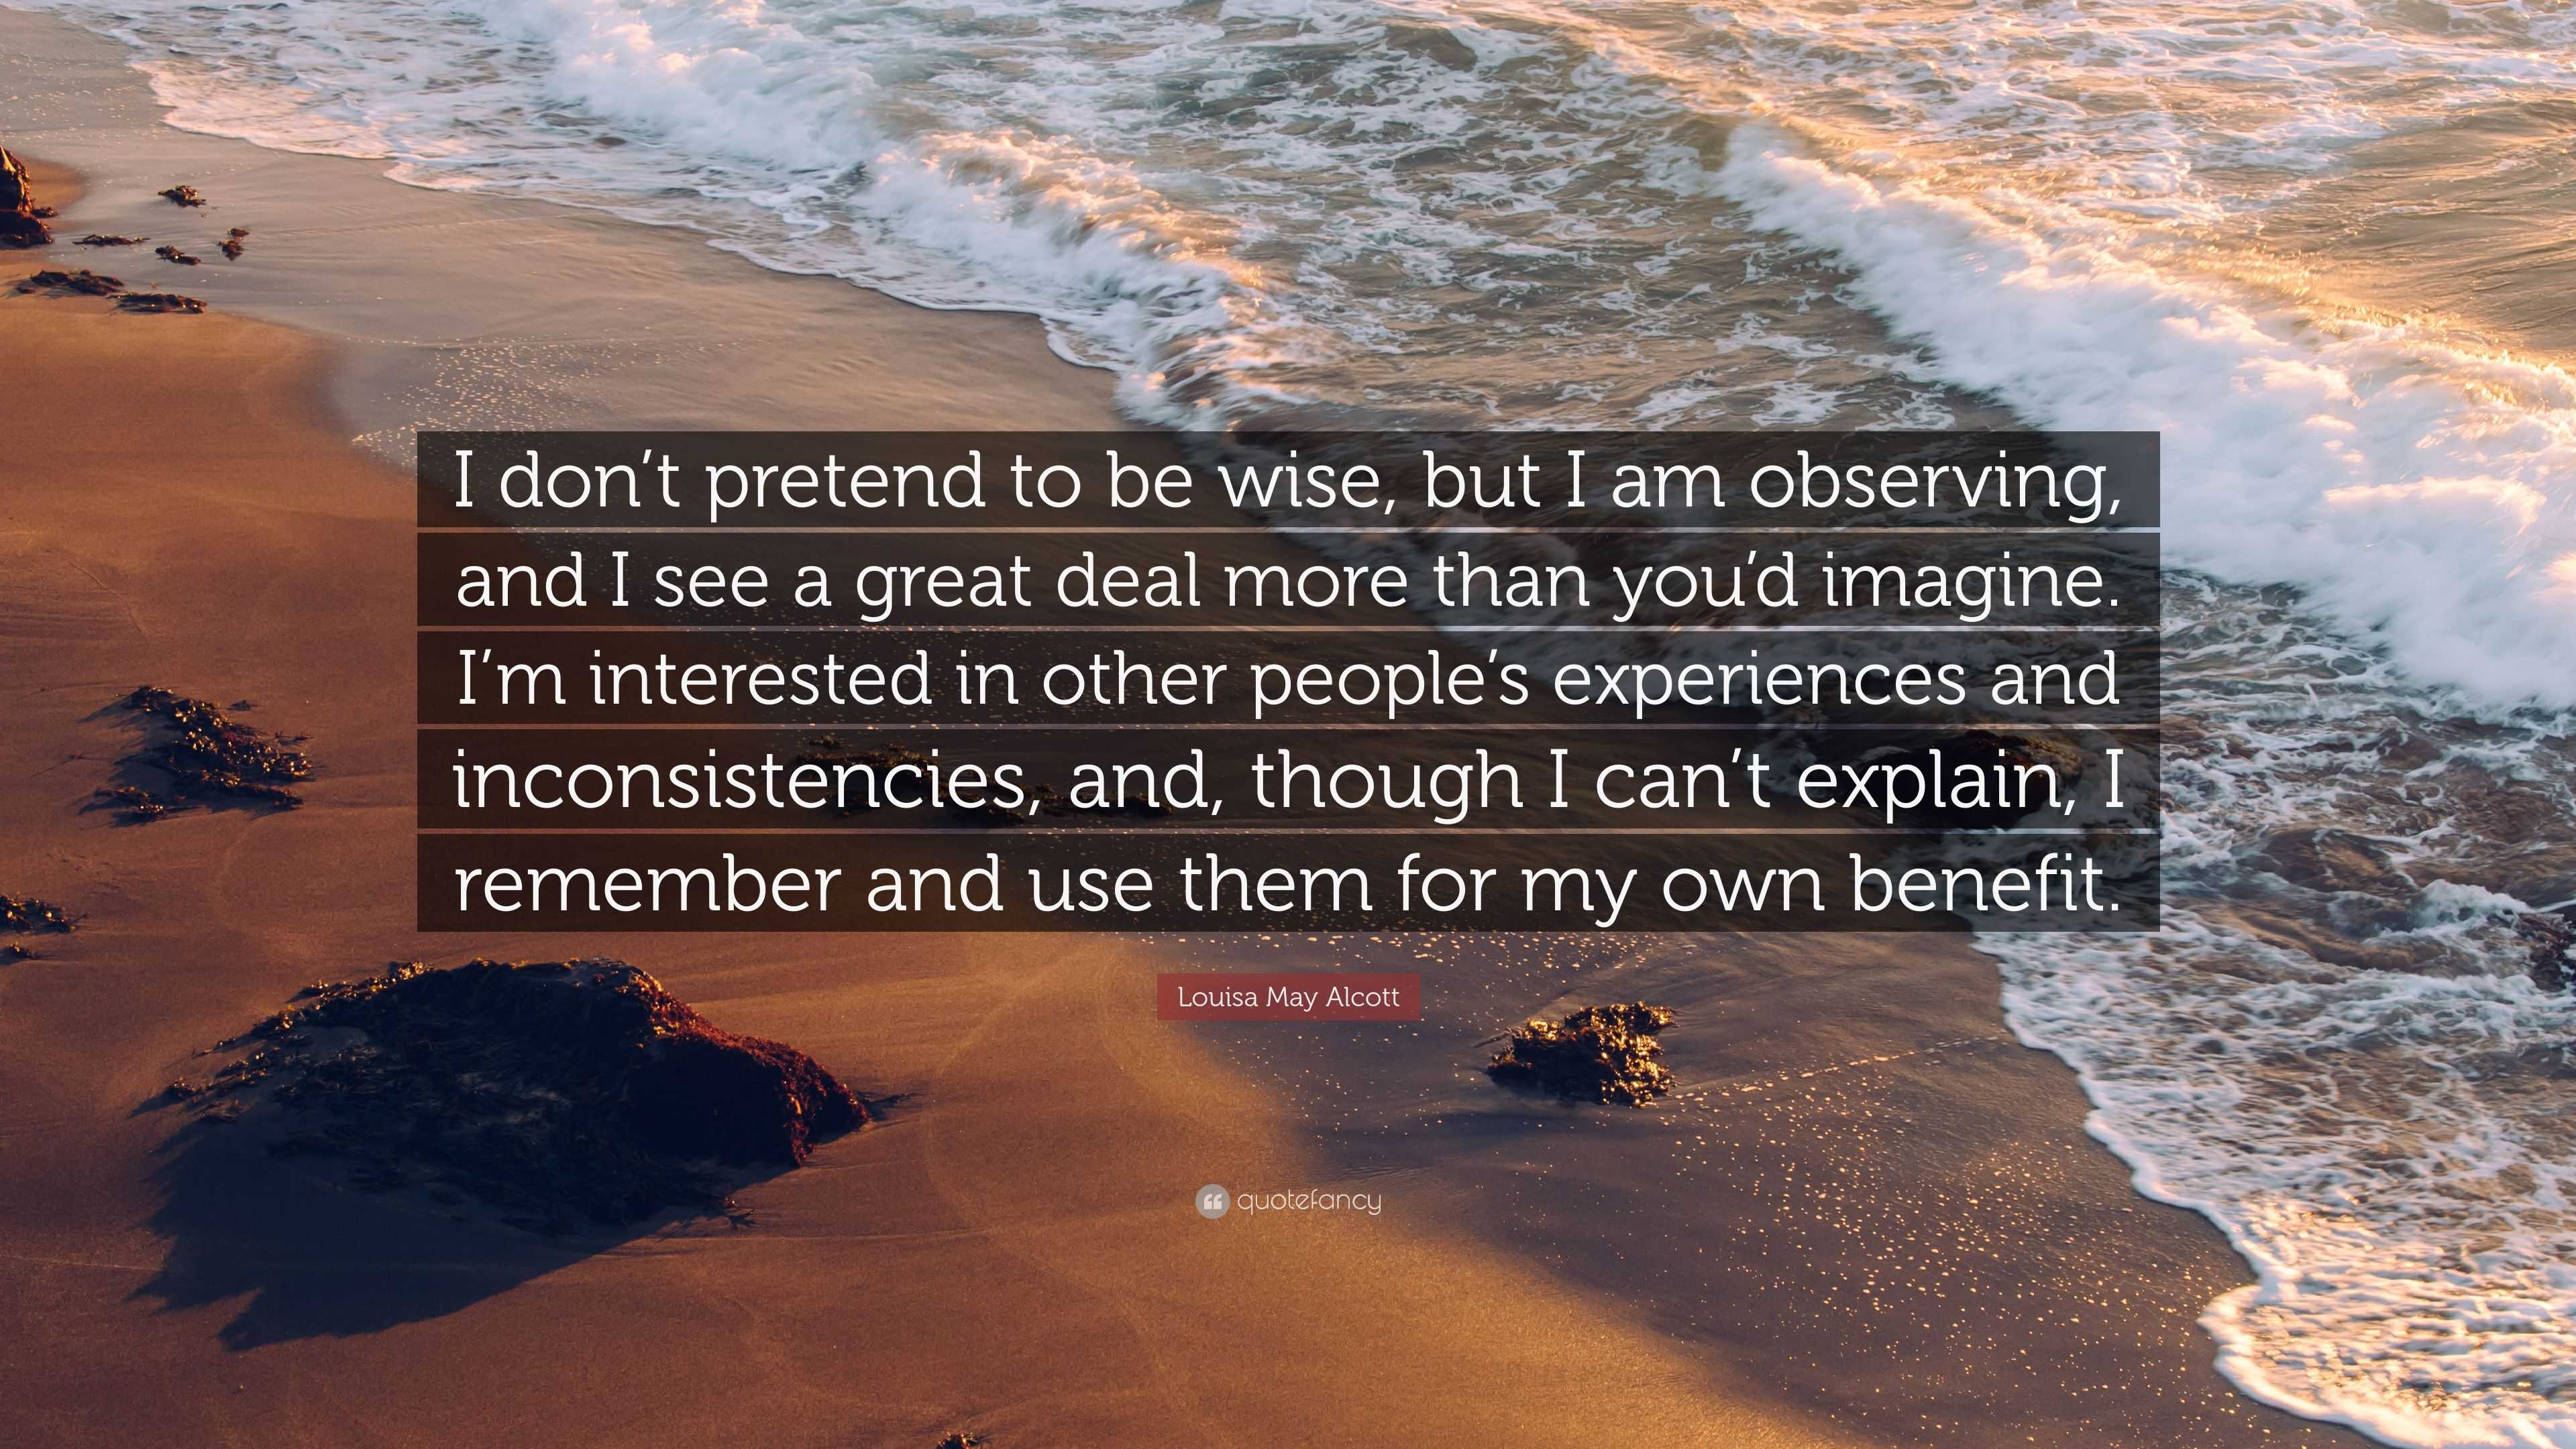 Louisa May Alcott Quote: “I don’t pretend to be wise, but I am ...